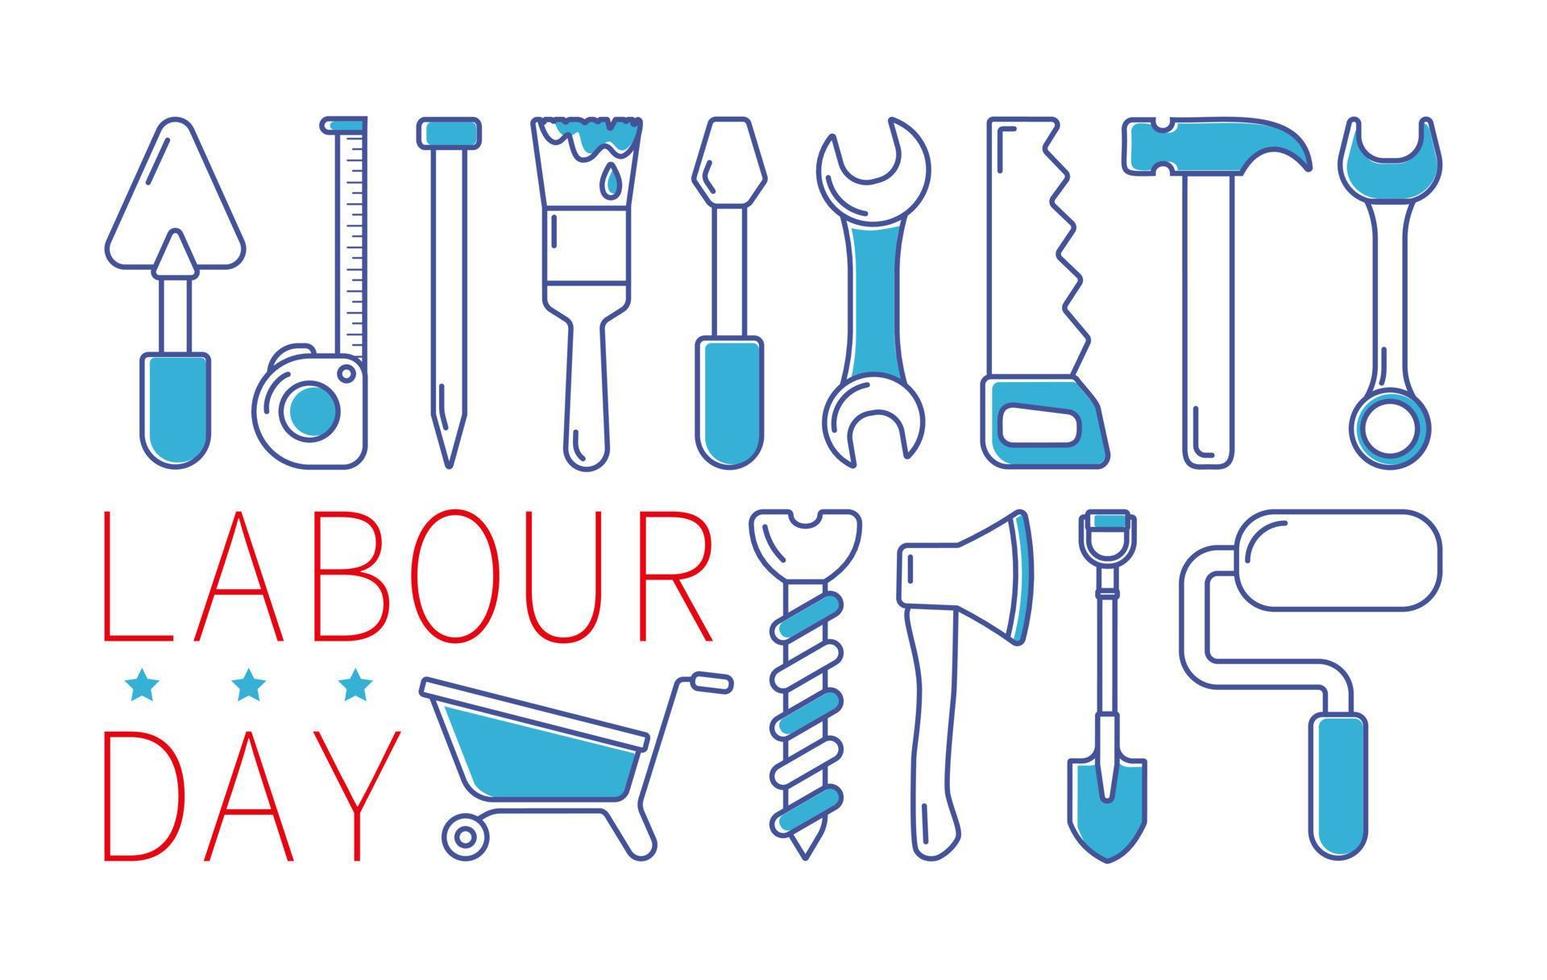 Labour day outline icon set. International Labour day and Industry tool icon set. For modern concepts, web and apps. Flat linear design. Vector illustration